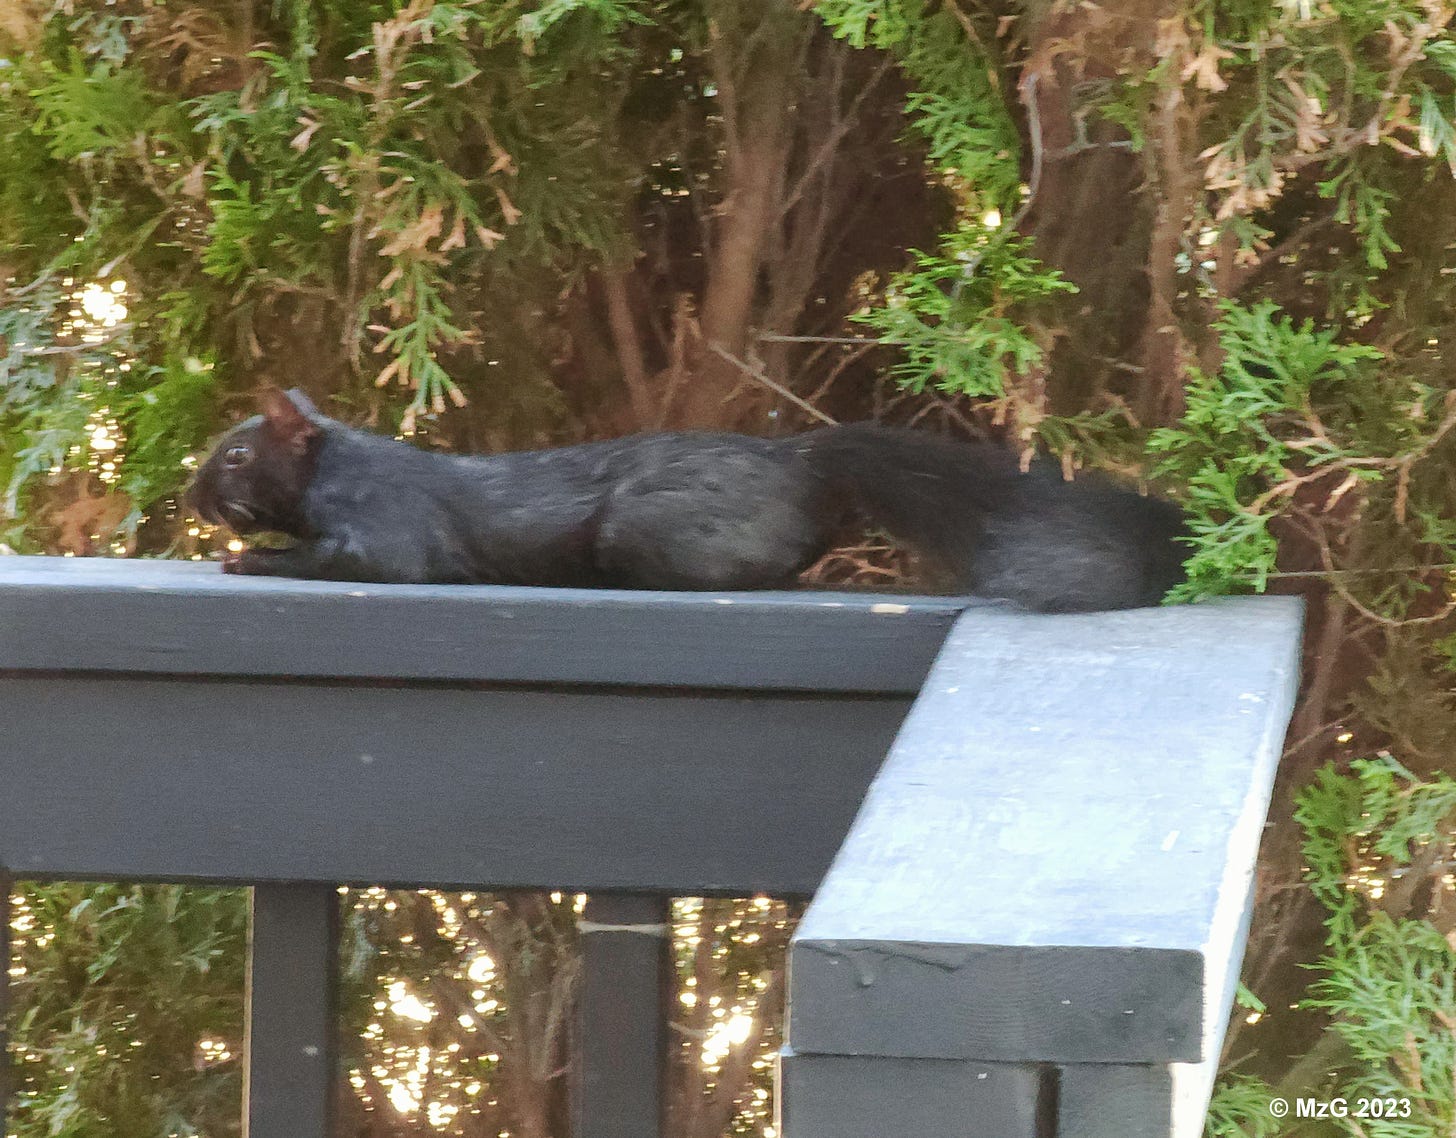 A Great Lake Black Squirrel Getting Ready to Sploot on a Wooden Railing in Front of A Cedar Tree